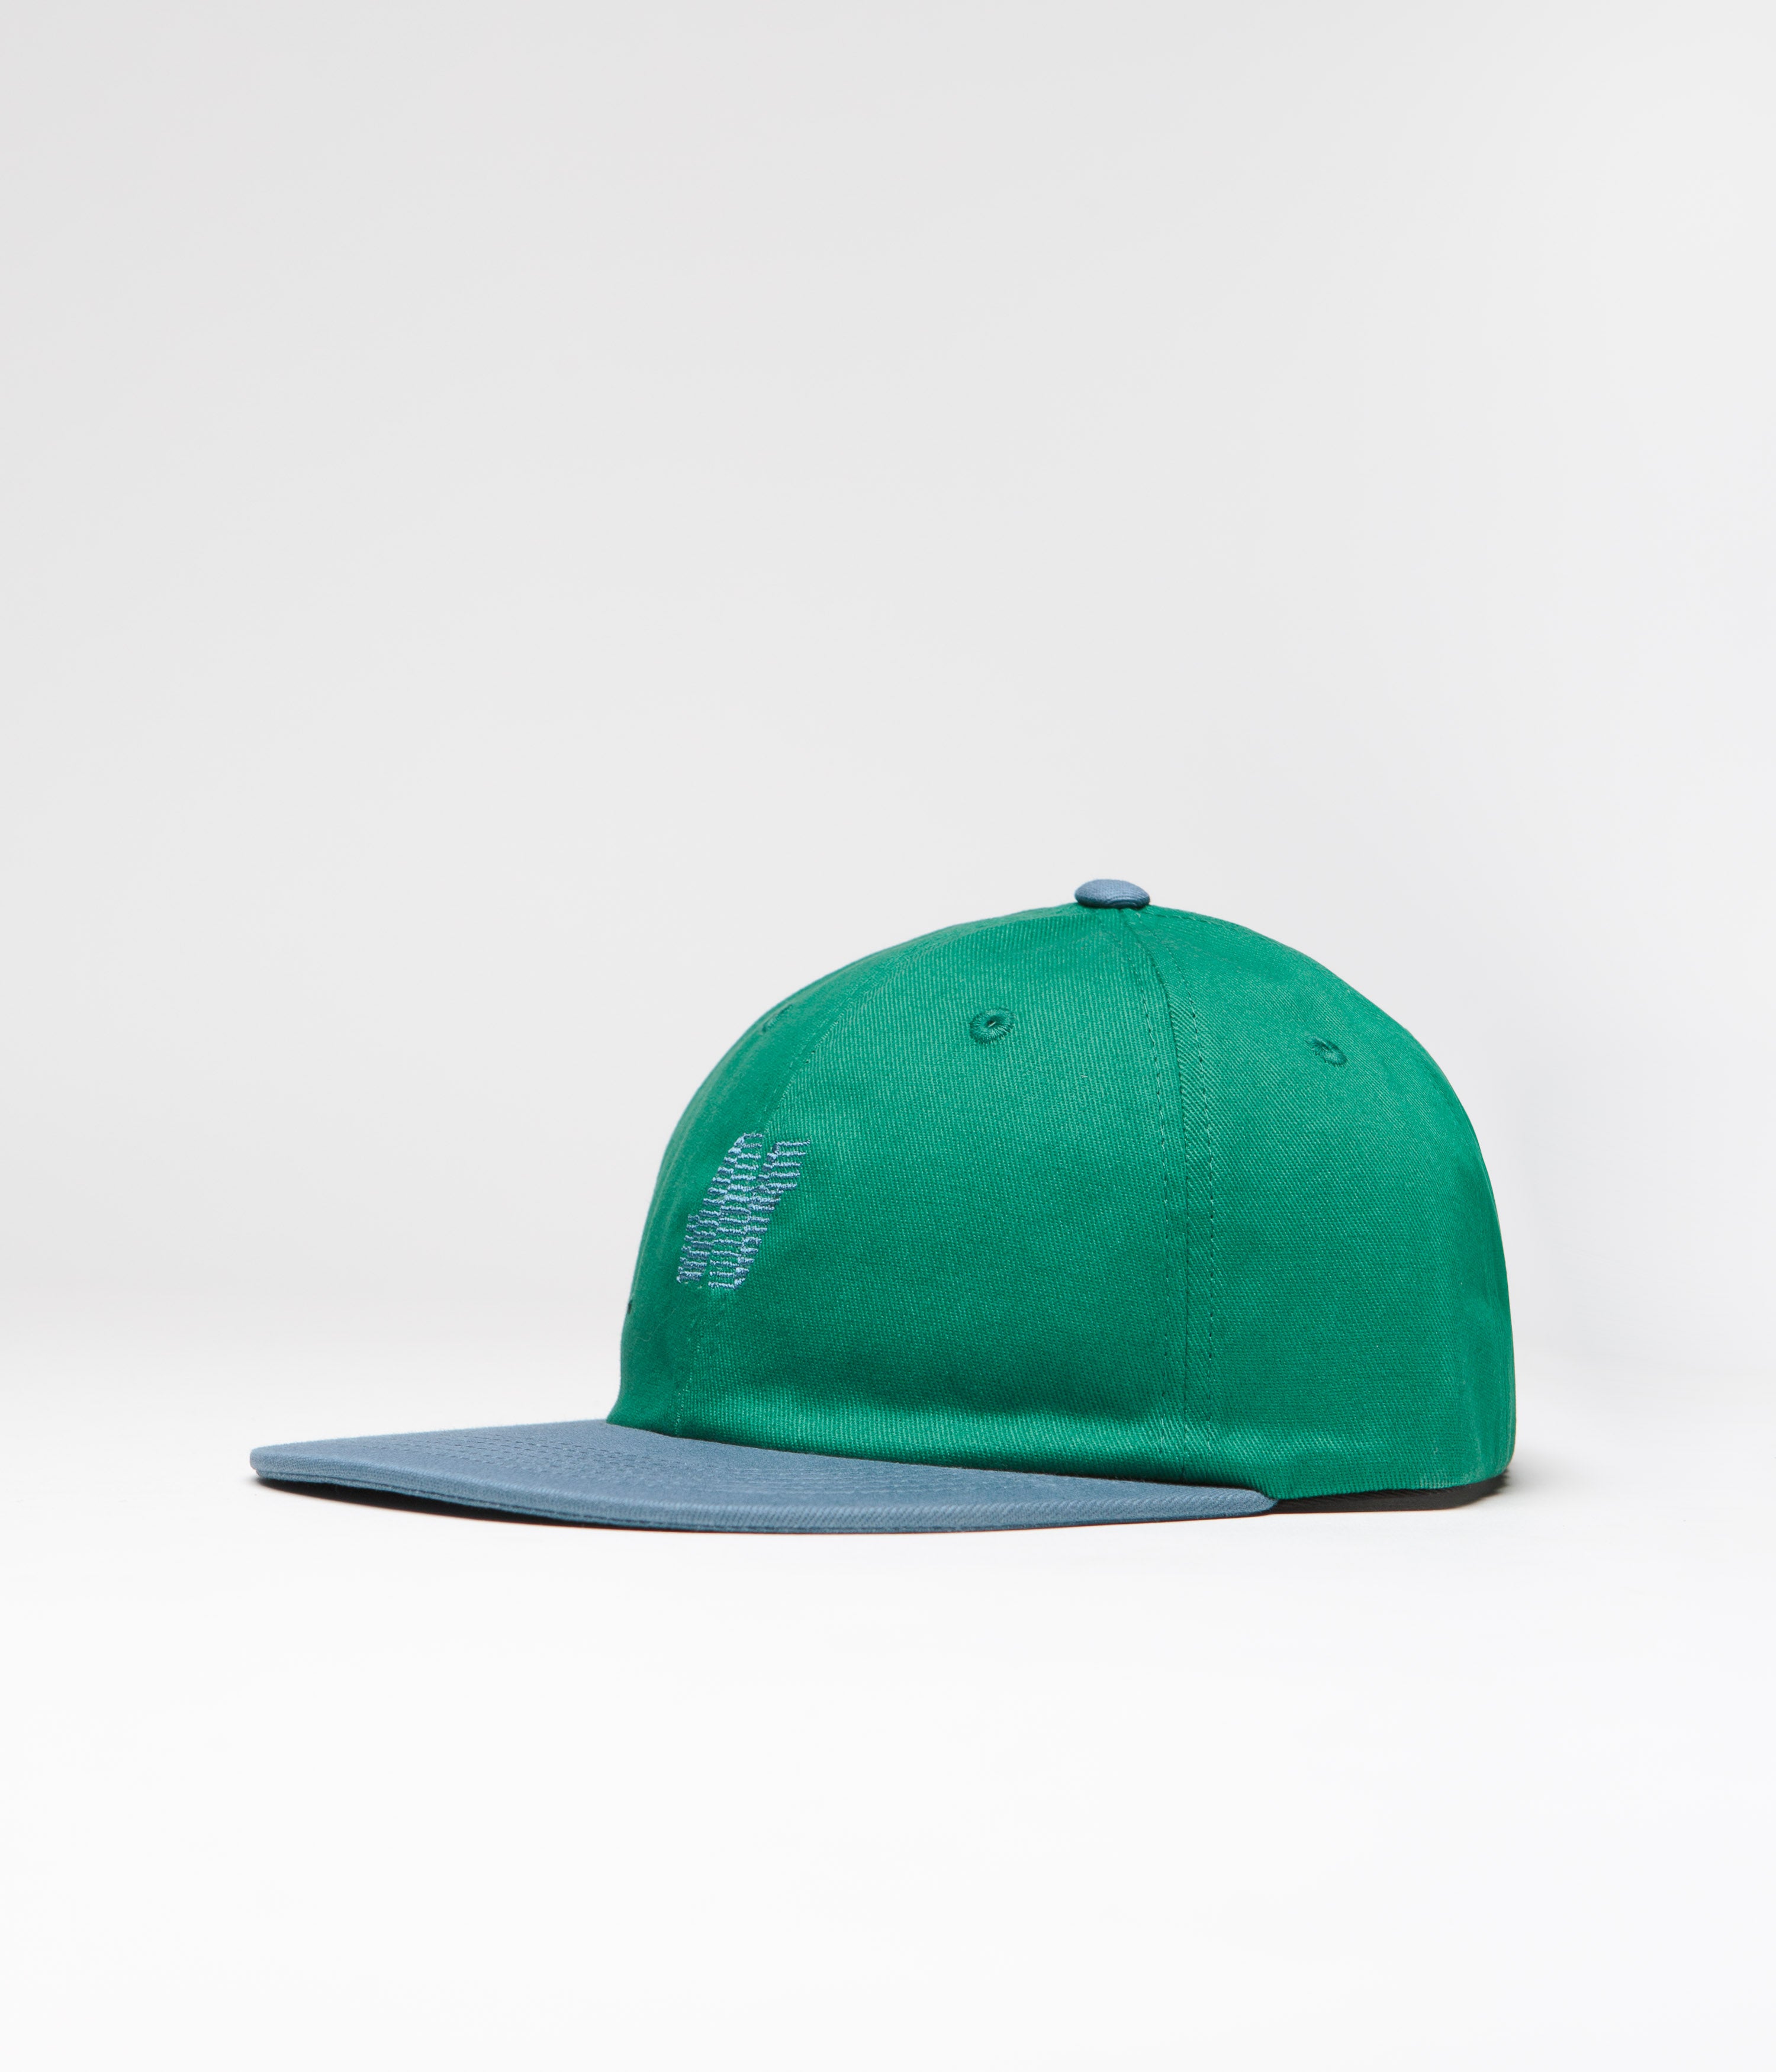 Hats | Get Free Next Day Delivery - Page 4 - Spend £85 | Caps 